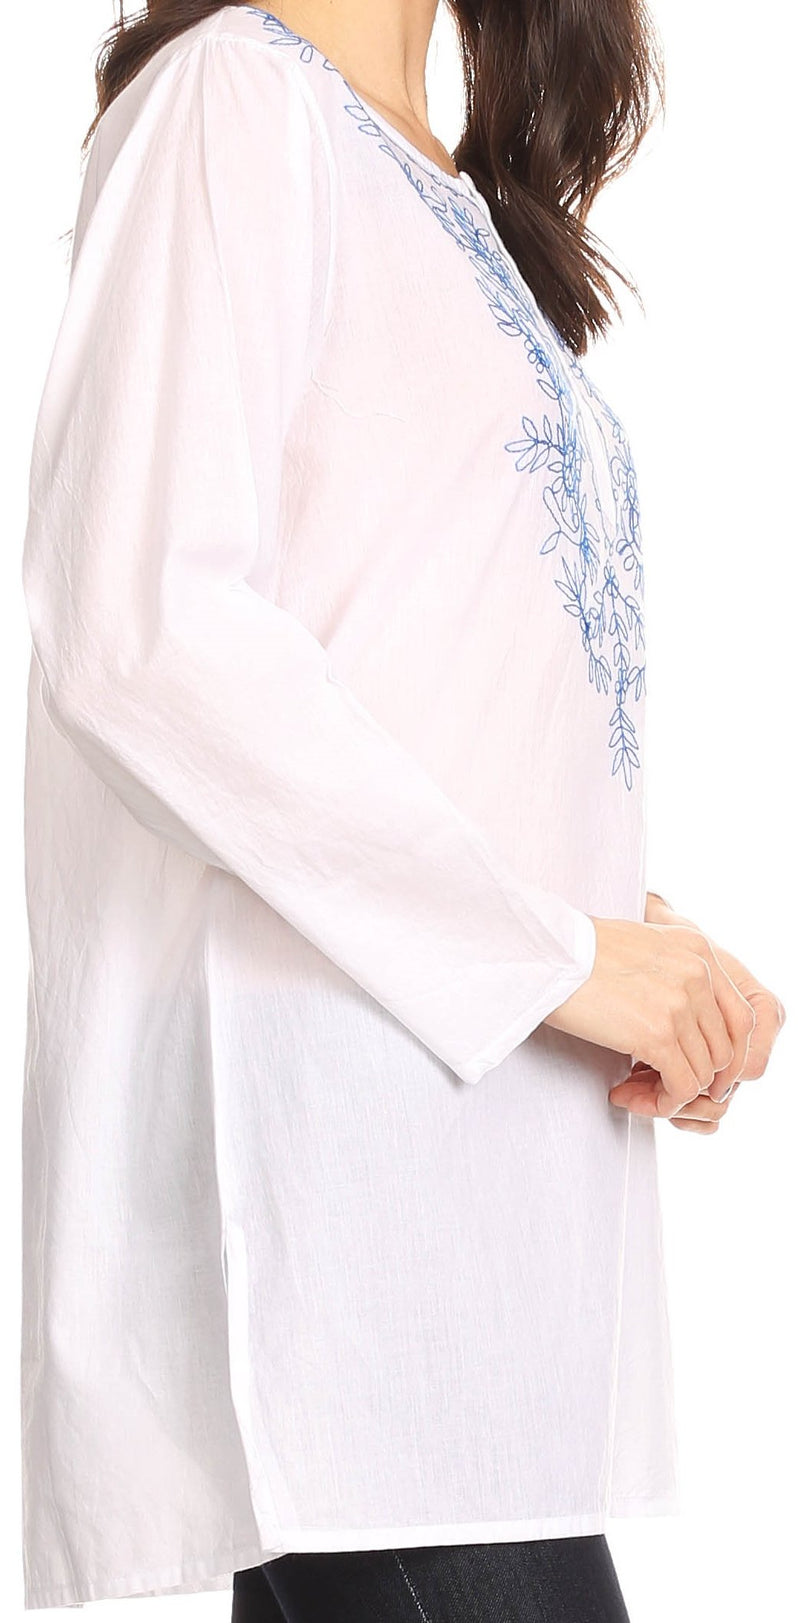 Sakkas Ariana Long Sleeve Button Up Blouse with Floral Embroidery